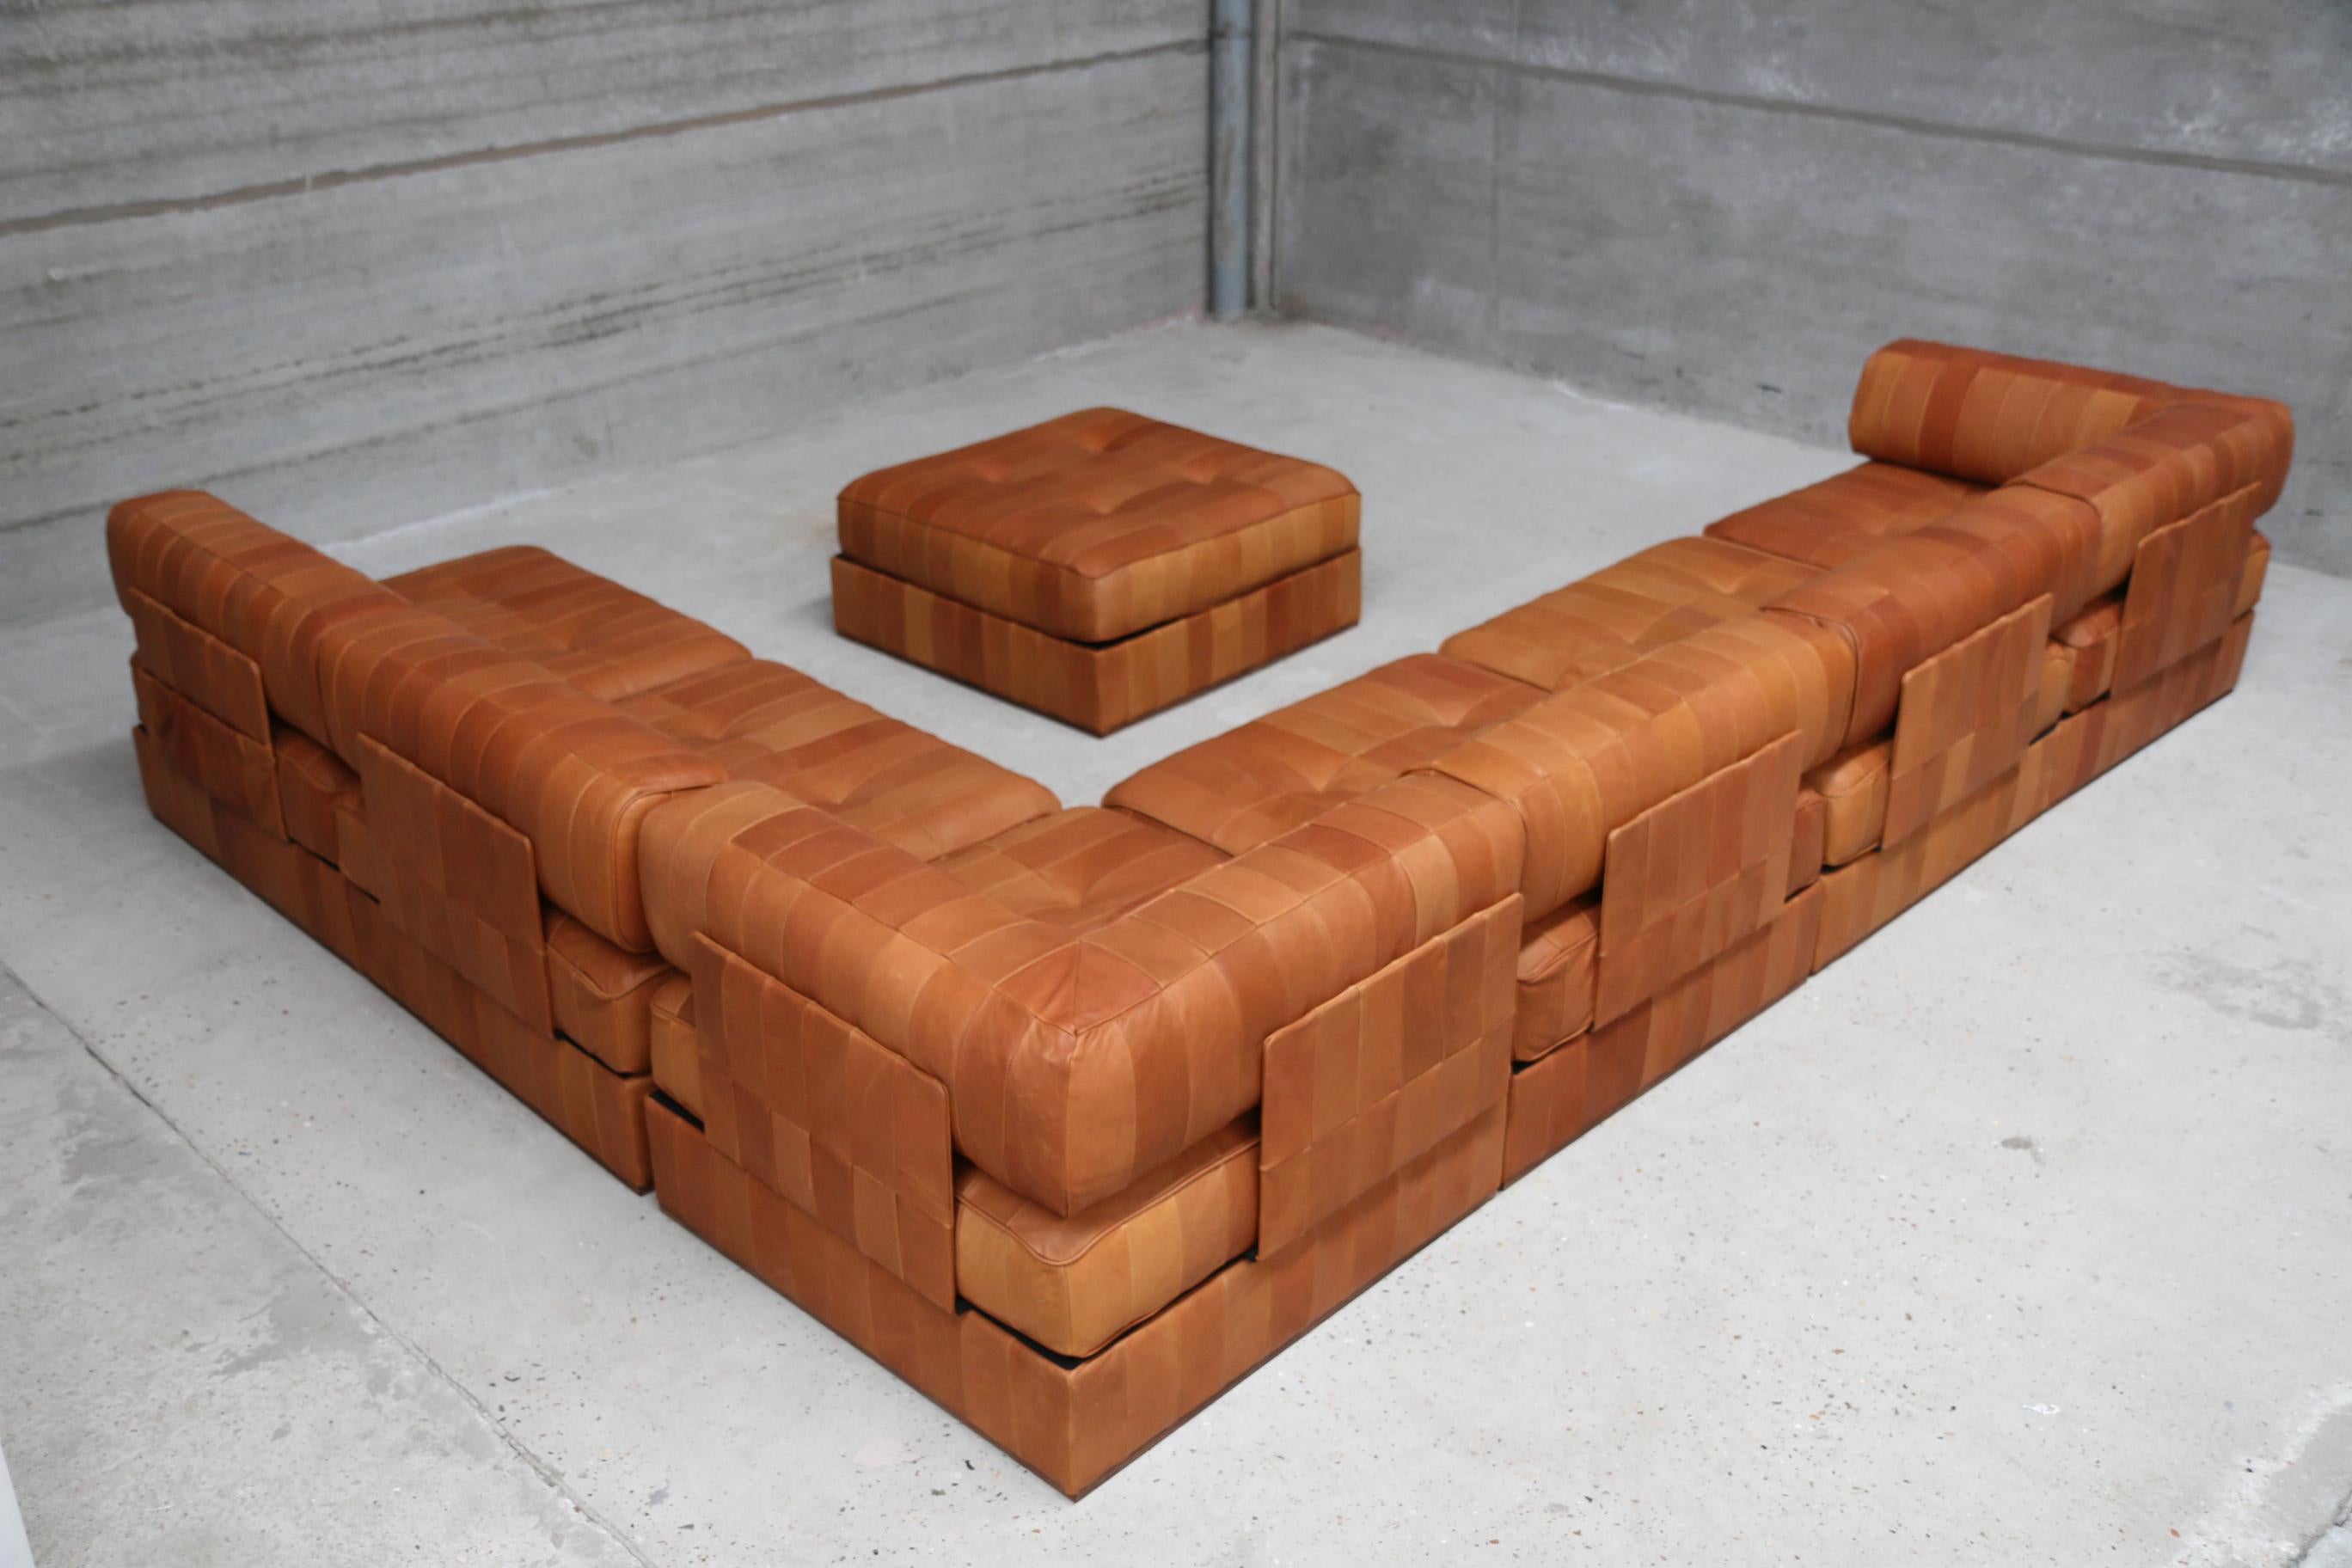 Iconic ds88 modular patchwork sofa restored in our signature vintage aniline leather. New quality foam and new leather. You can play with the modular composition of the sofa. This set consists of 7 modules, 4 normal modules and 2 corner L modules